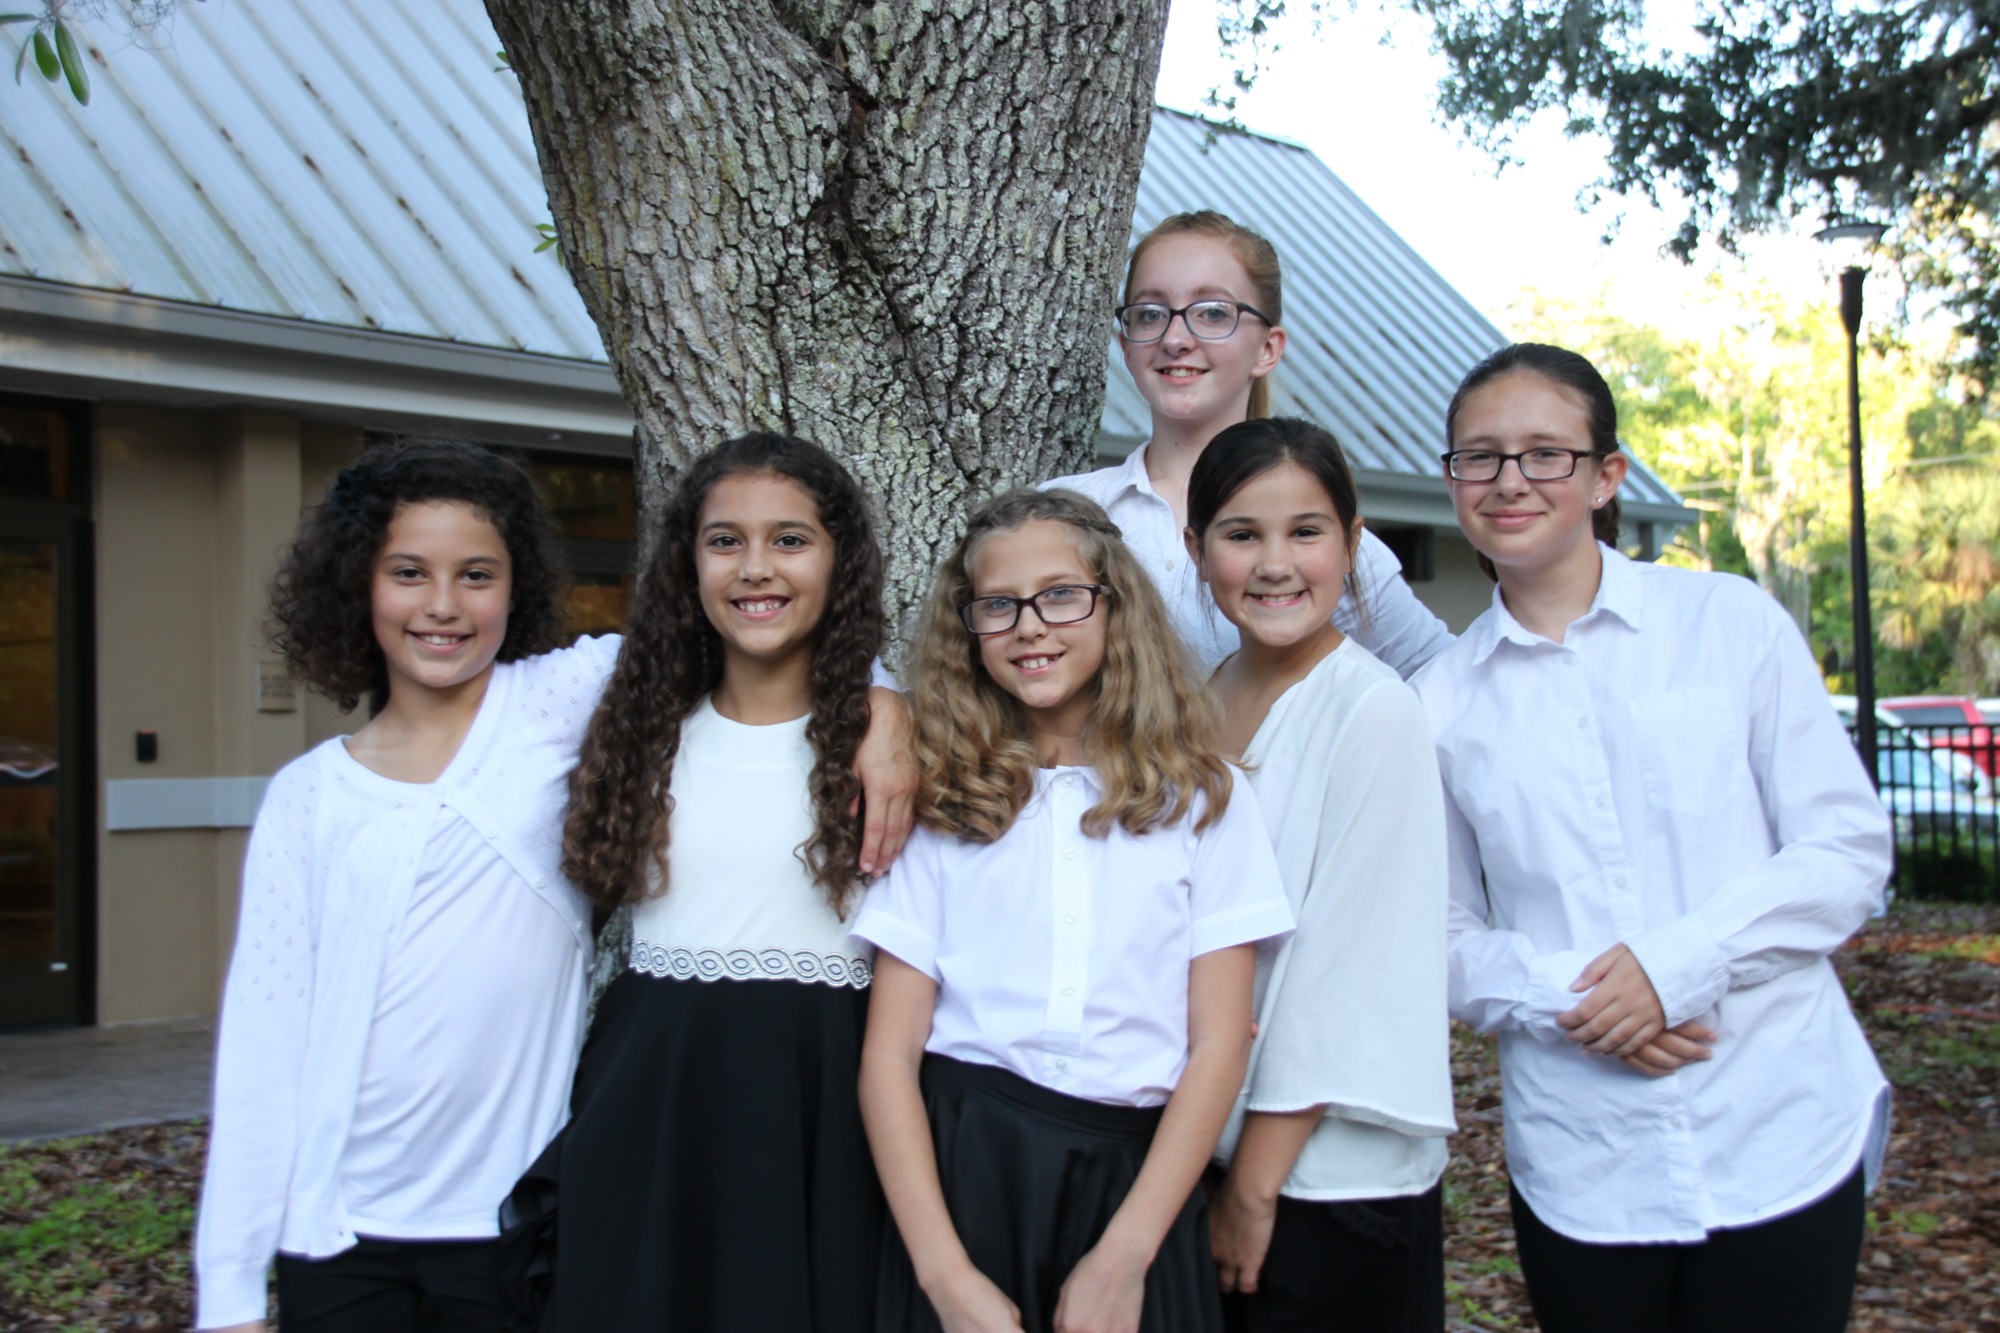 The Old Kings singers who were selected to sing in the Flagler County Elementary Chorus. Back: Annie Laird; Front: Jade Hreib, Eliana Mendez, Daniela Mendez, Chloe Skoglund and Ashlee Barrett. Courtesy photo